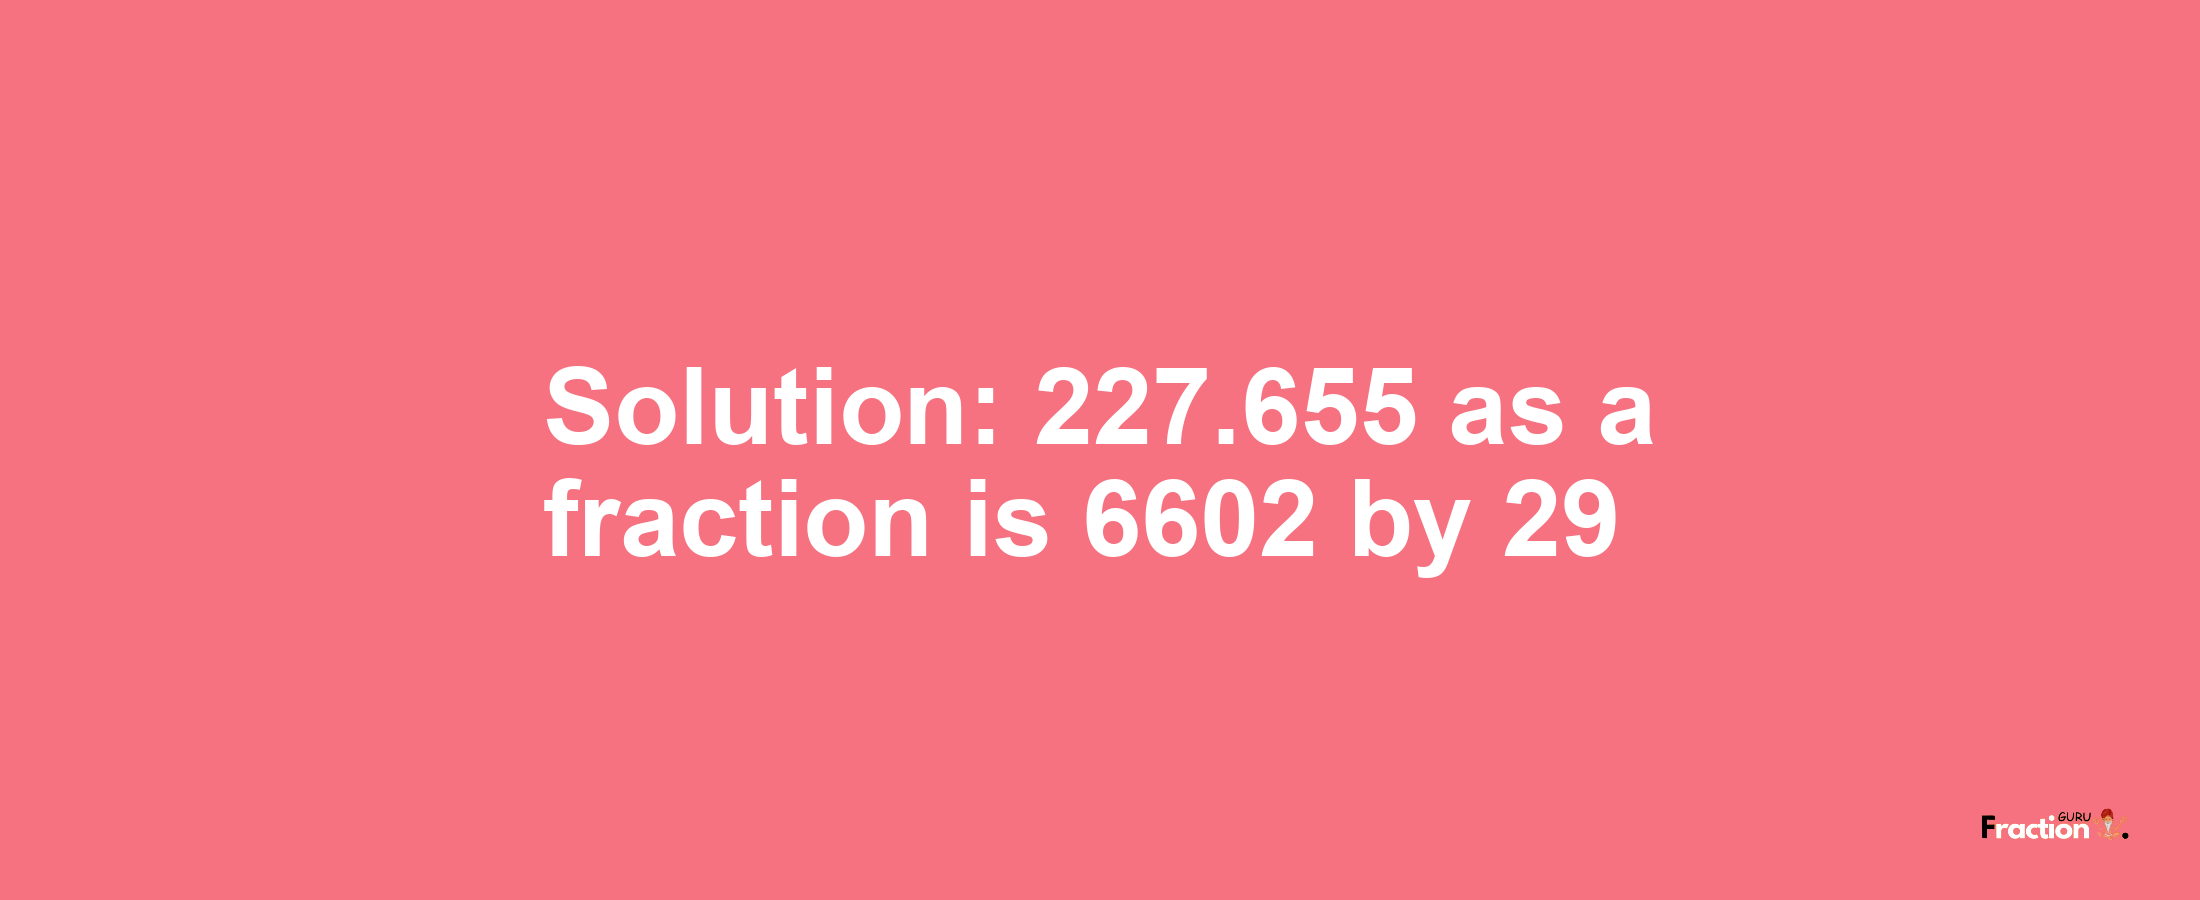 Solution:227.655 as a fraction is 6602/29